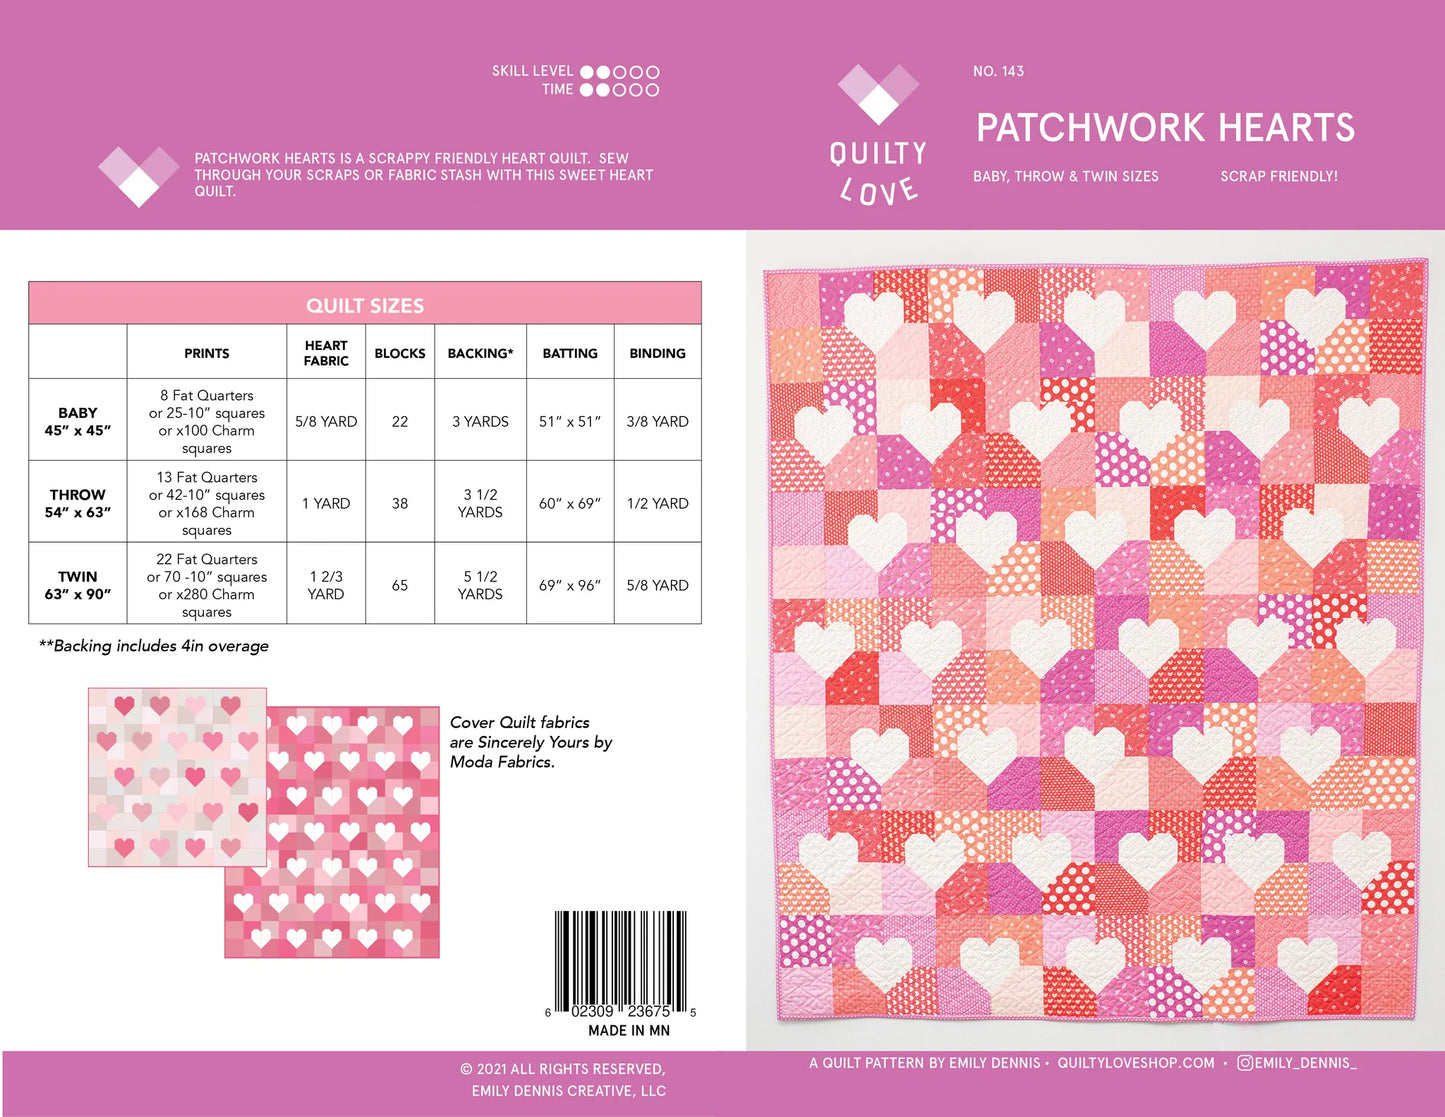 Patchwork Hearts Pattern by Emily Dennis